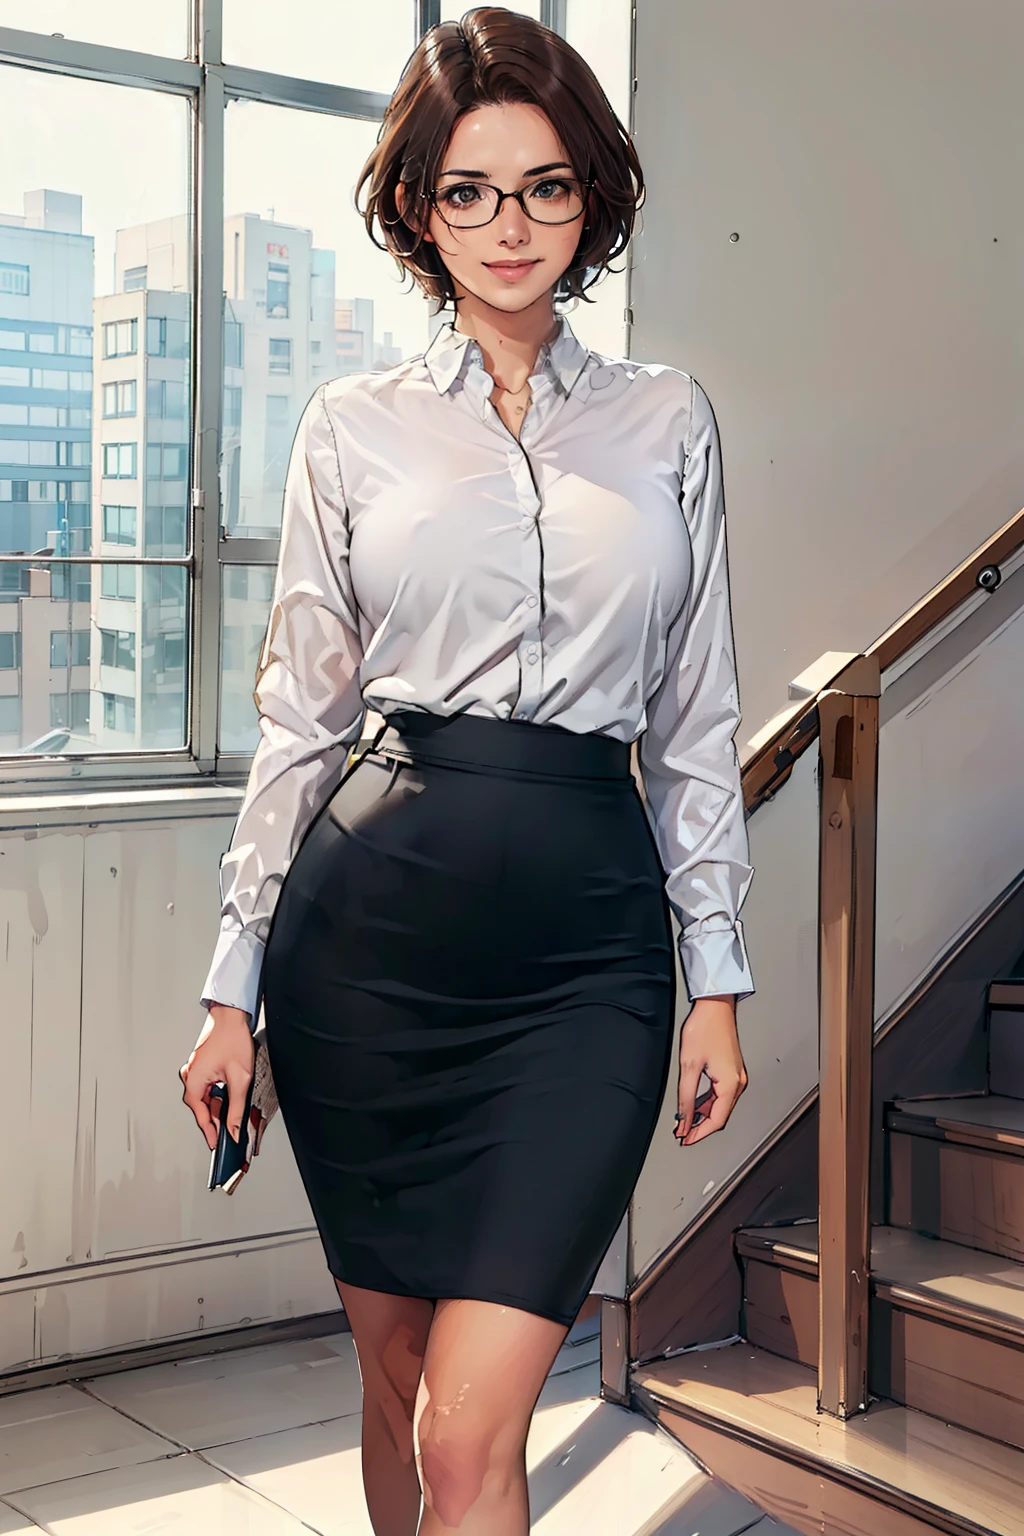 ((Realistic Light, Best Quality, 8K, Masterpiece: 1.3)), 1girl, female teacher, Slim Beauty: 1.4, (Brown hair,  short hair length to shoulder, glasses, large breasts: 1.3), wearing long sleeve white shirt(( appropriate shirt)), black pencil skirt((length skirt to the knee)), walking alone at stair inside school, holding book(( only book)), smile, 